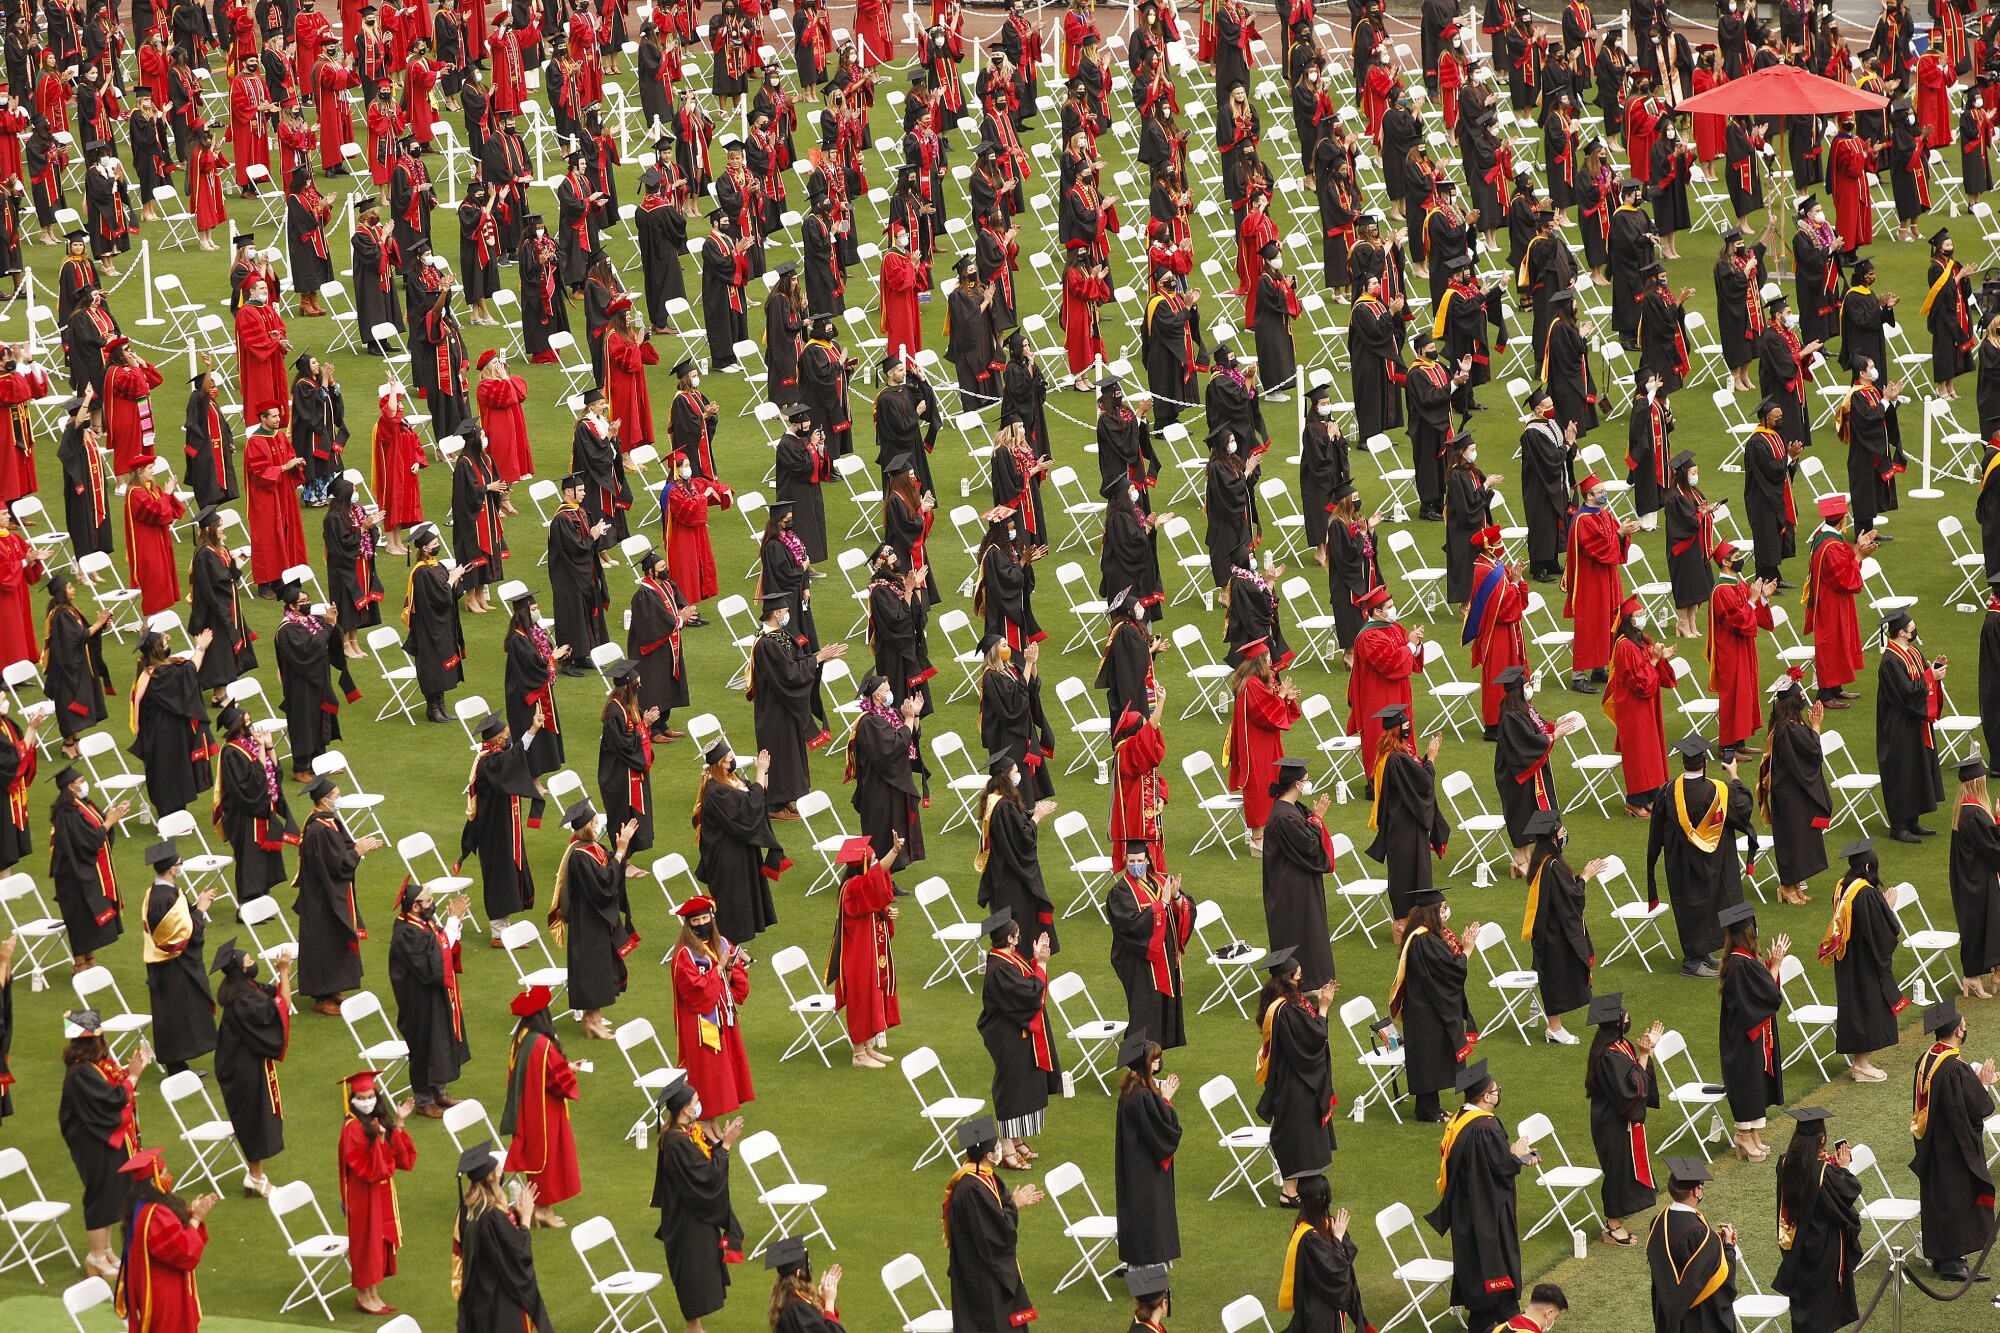 Dozens of students in red or black gowns stand and clap in front of spaced-out white folding chairs on a field